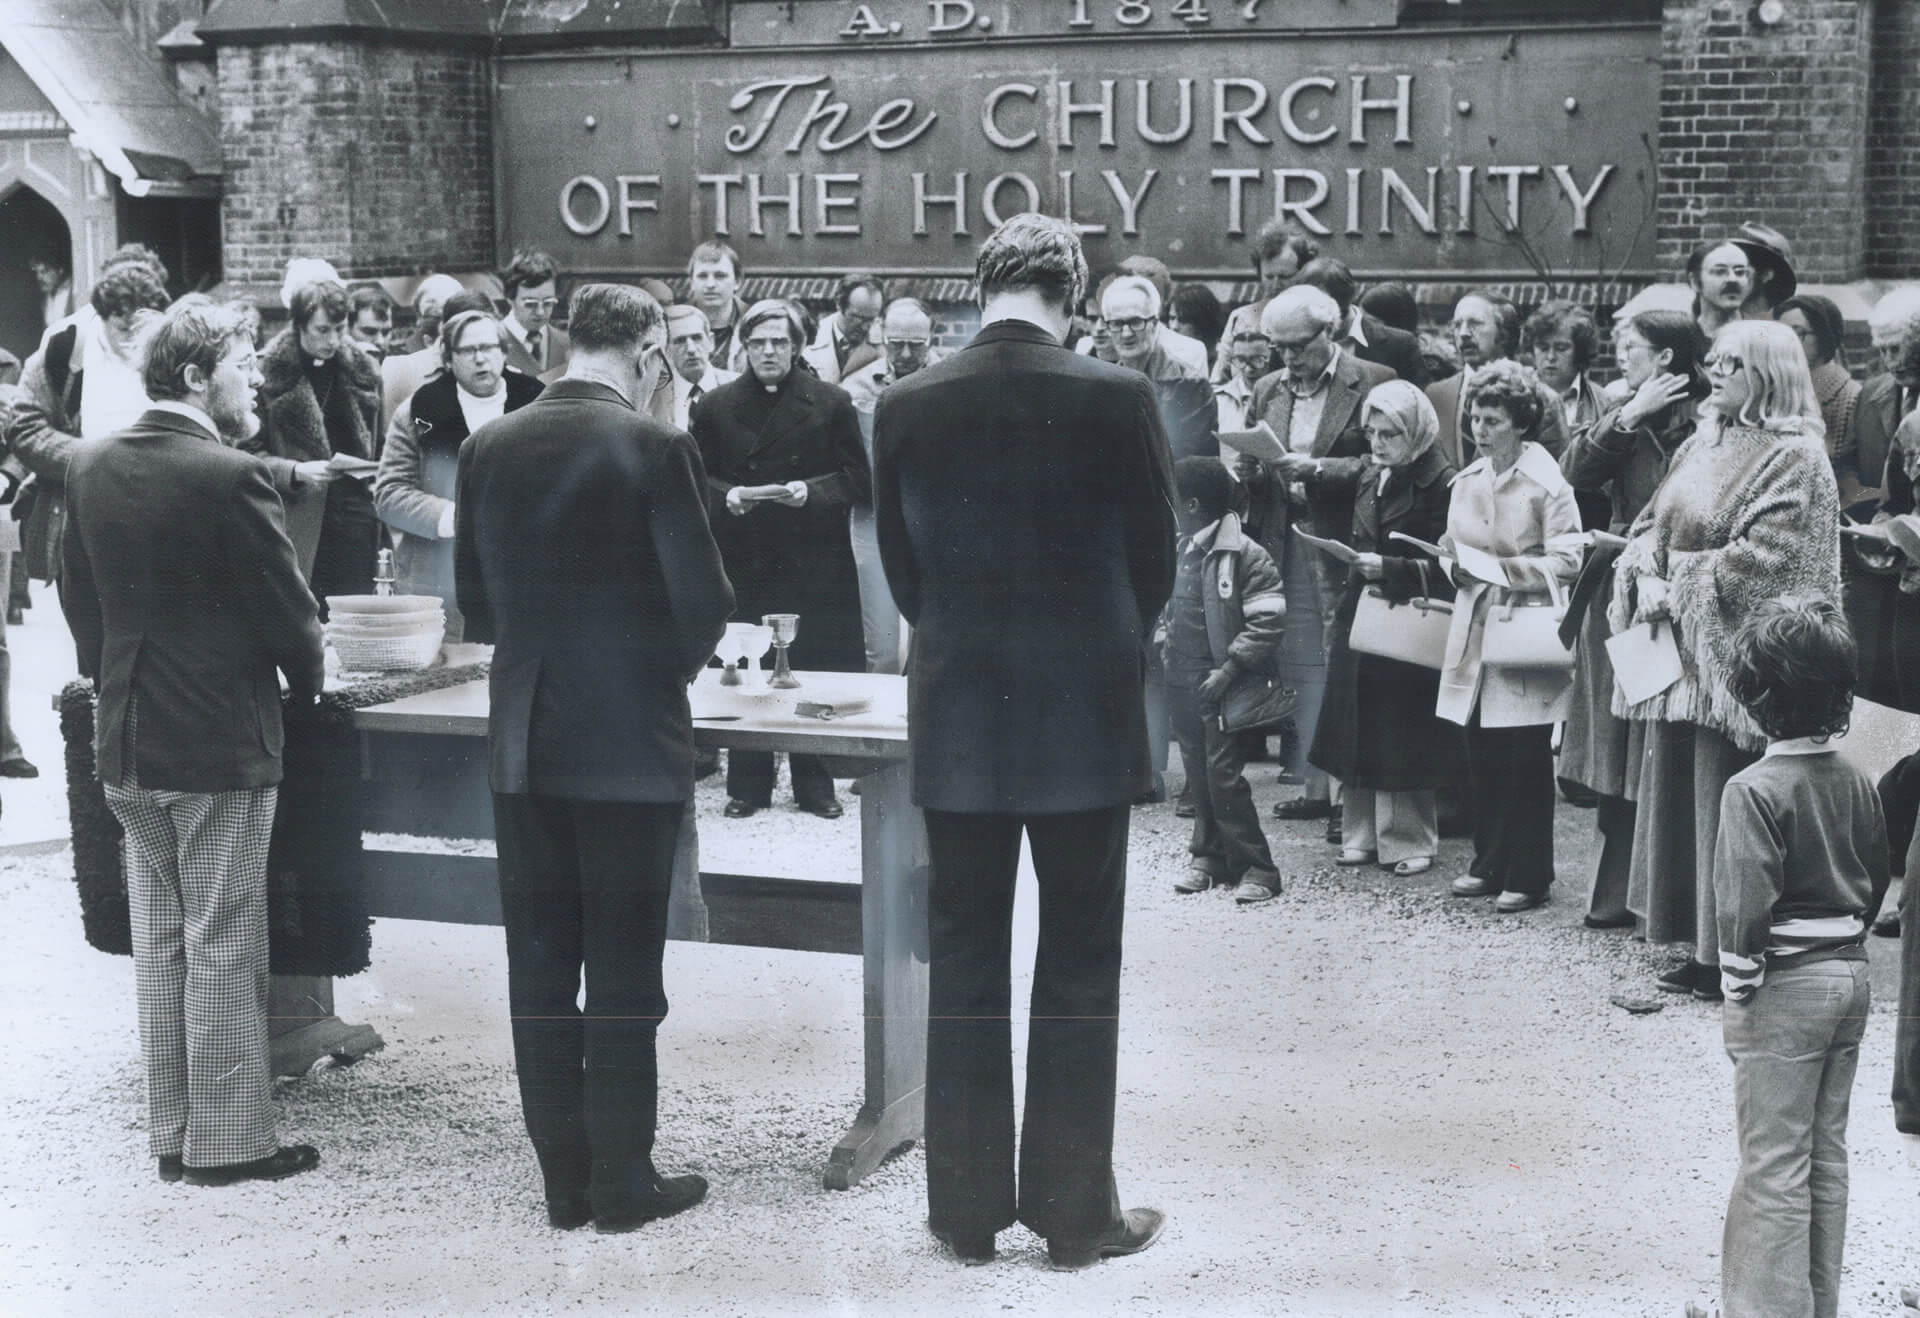 In 1977 members of Holy Trinity gather at the eastern end of the church to give thanks that it wasn't completely destroyed by fire.